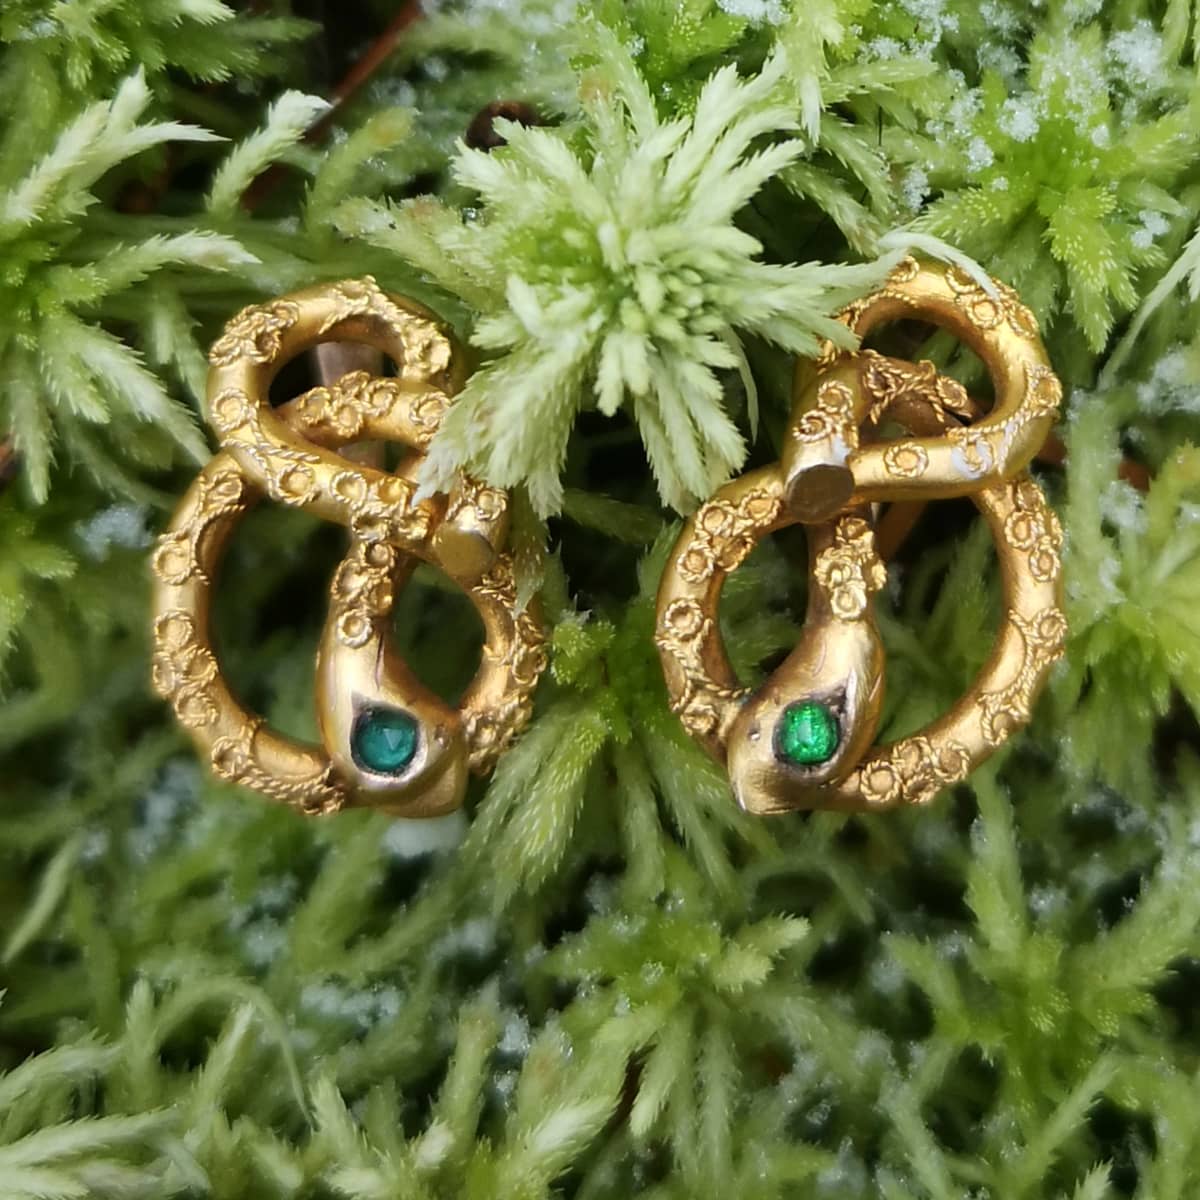 The Victorian serpent earrings - Medea's Mix